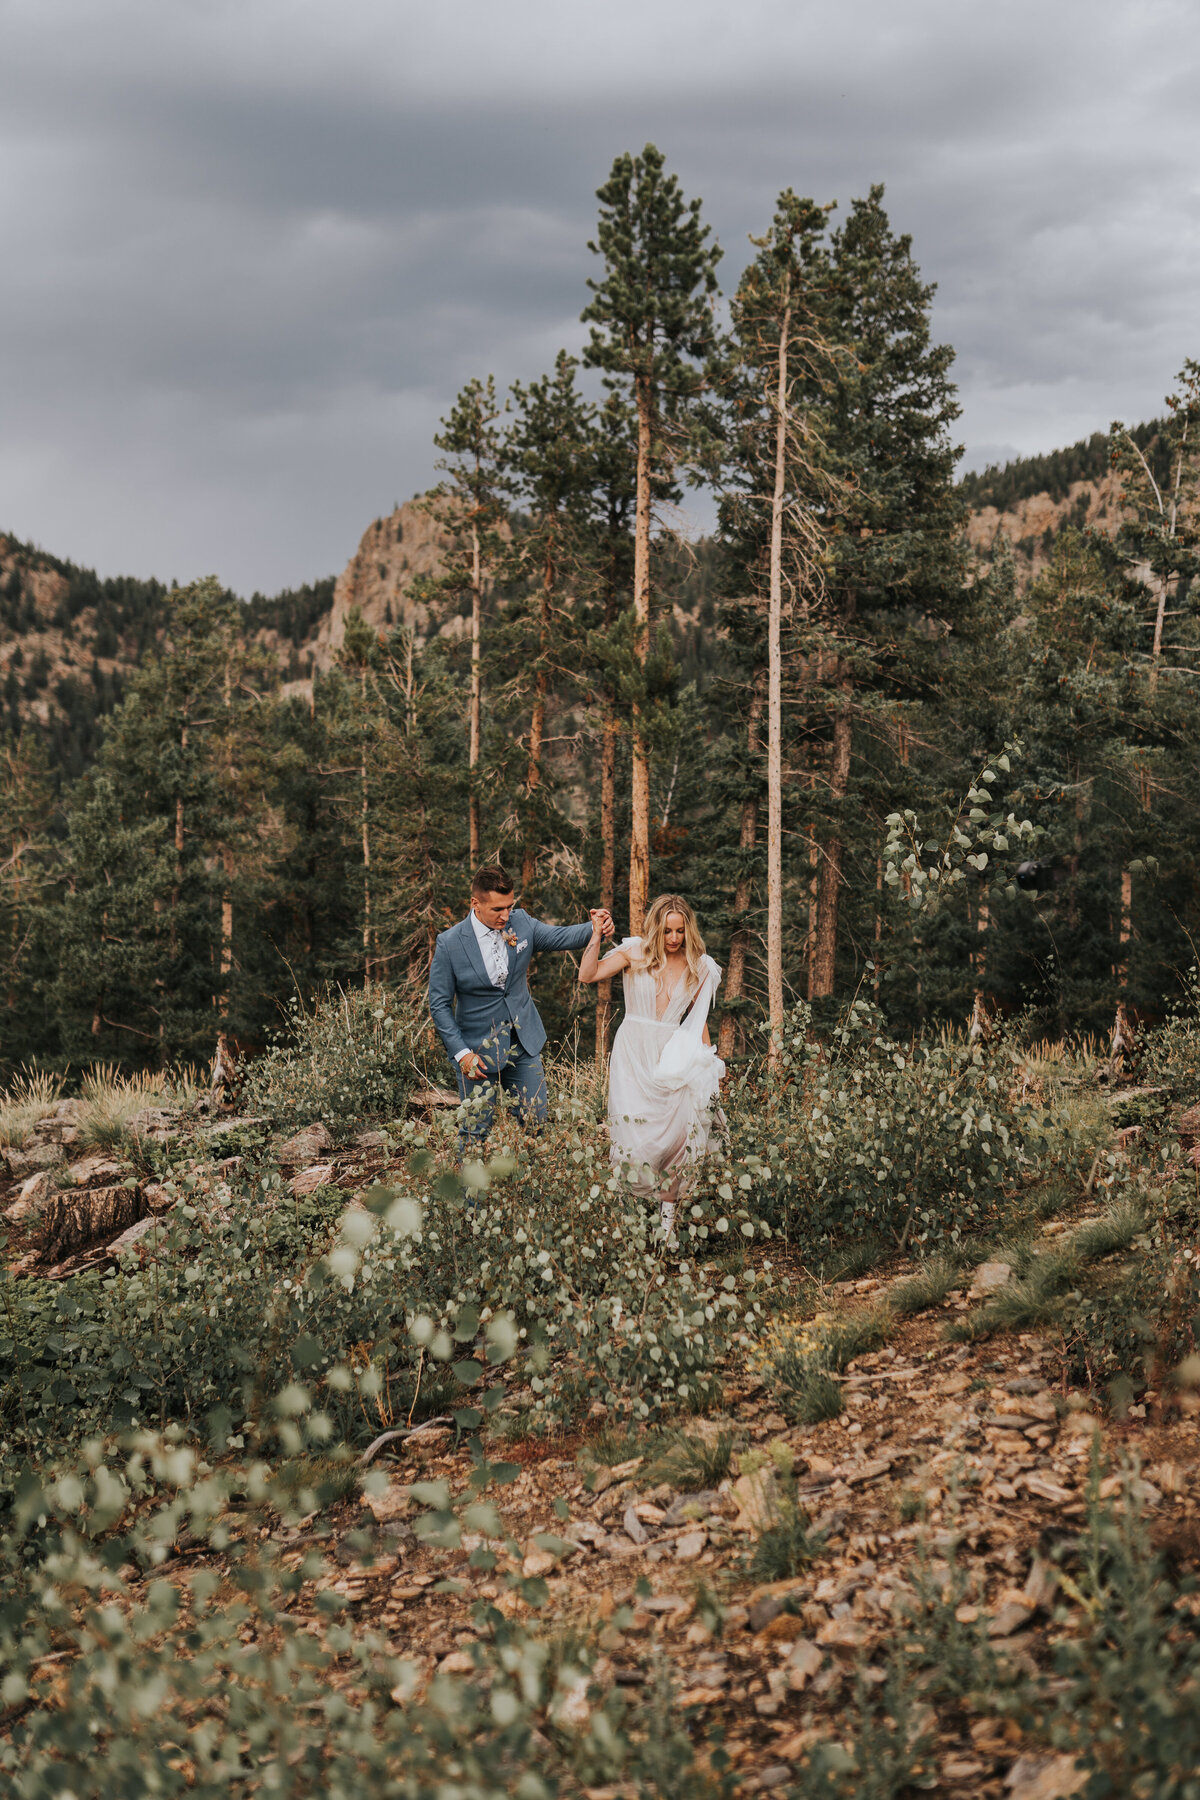 Bride and groom walking in a valley with a mountain range background